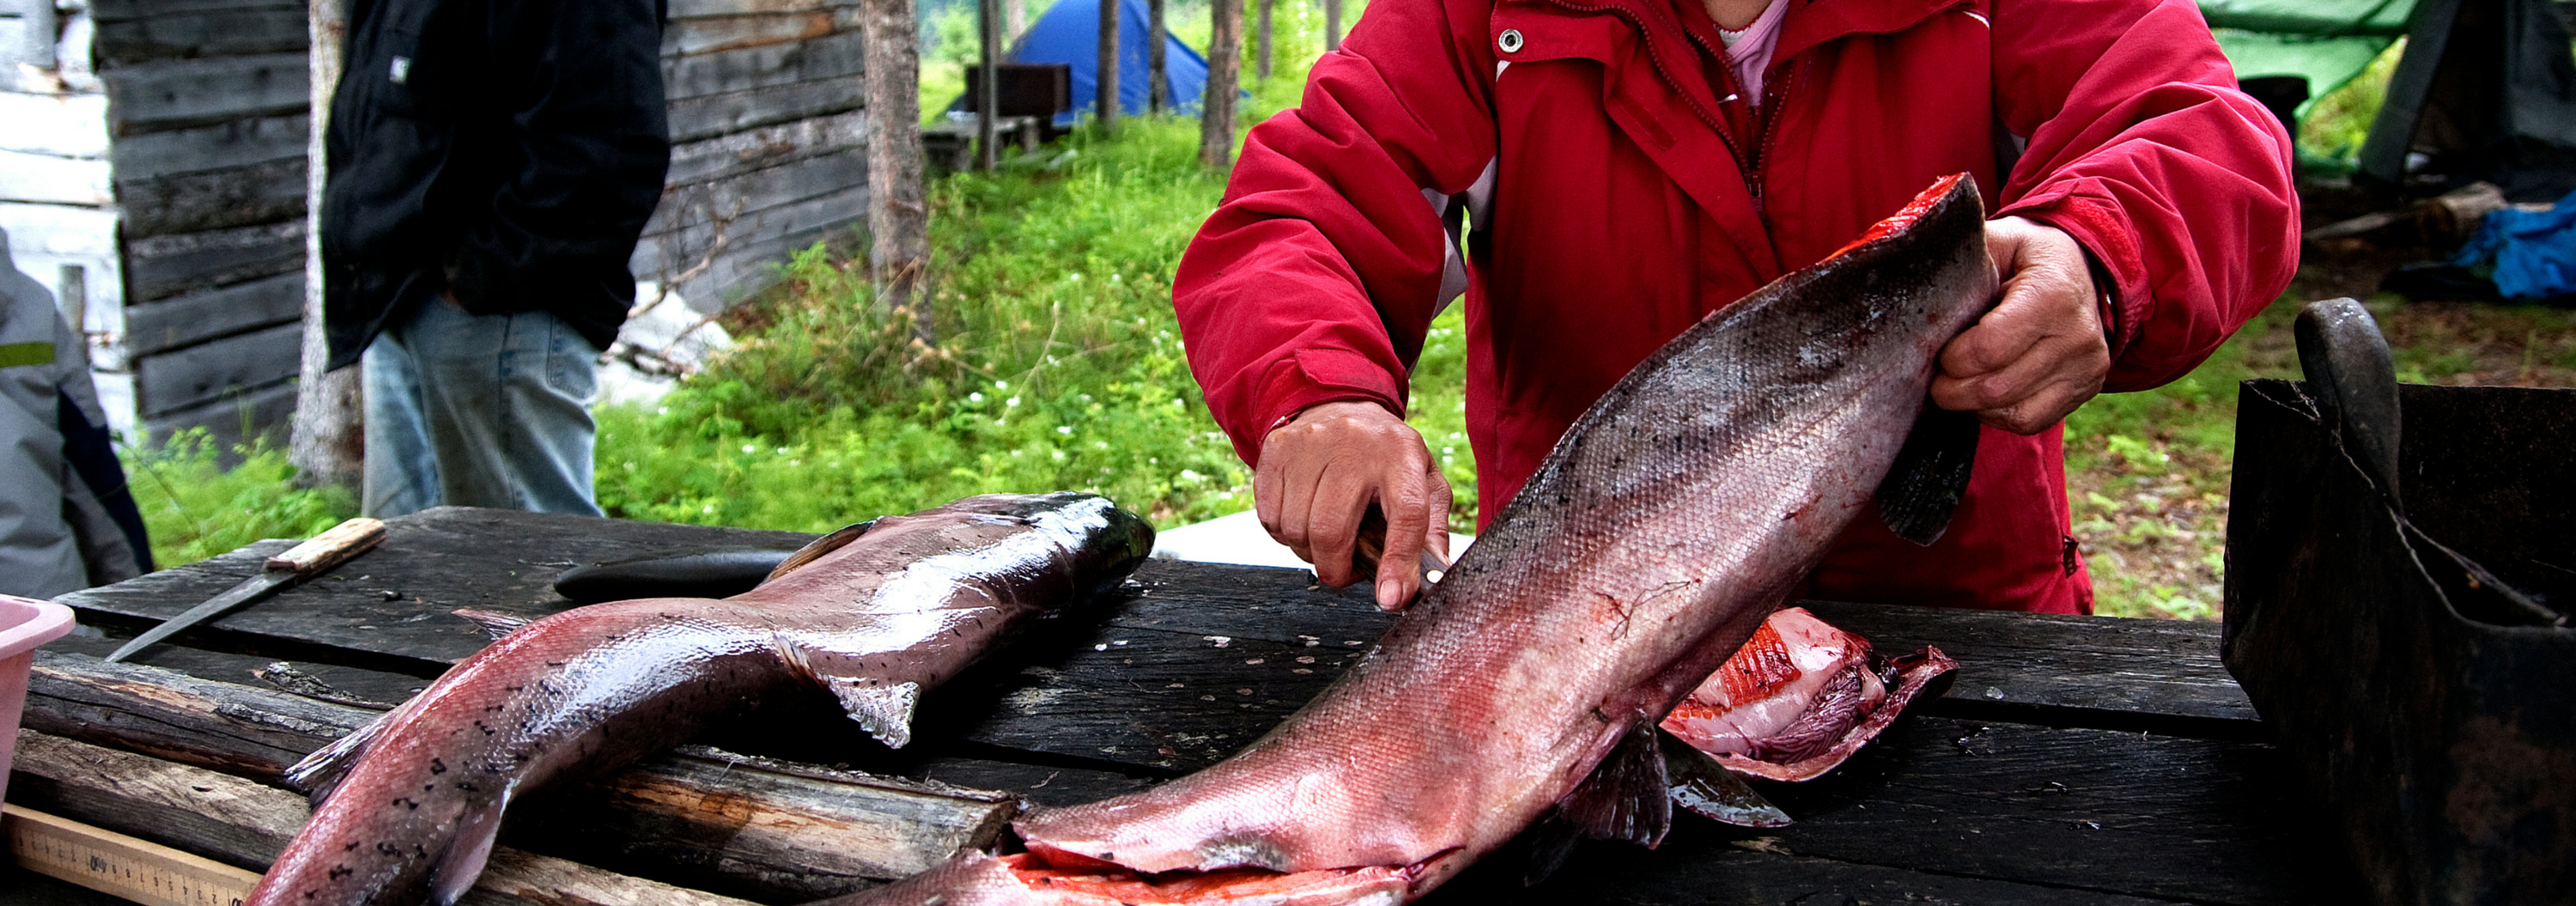 A woman cleans a fish.